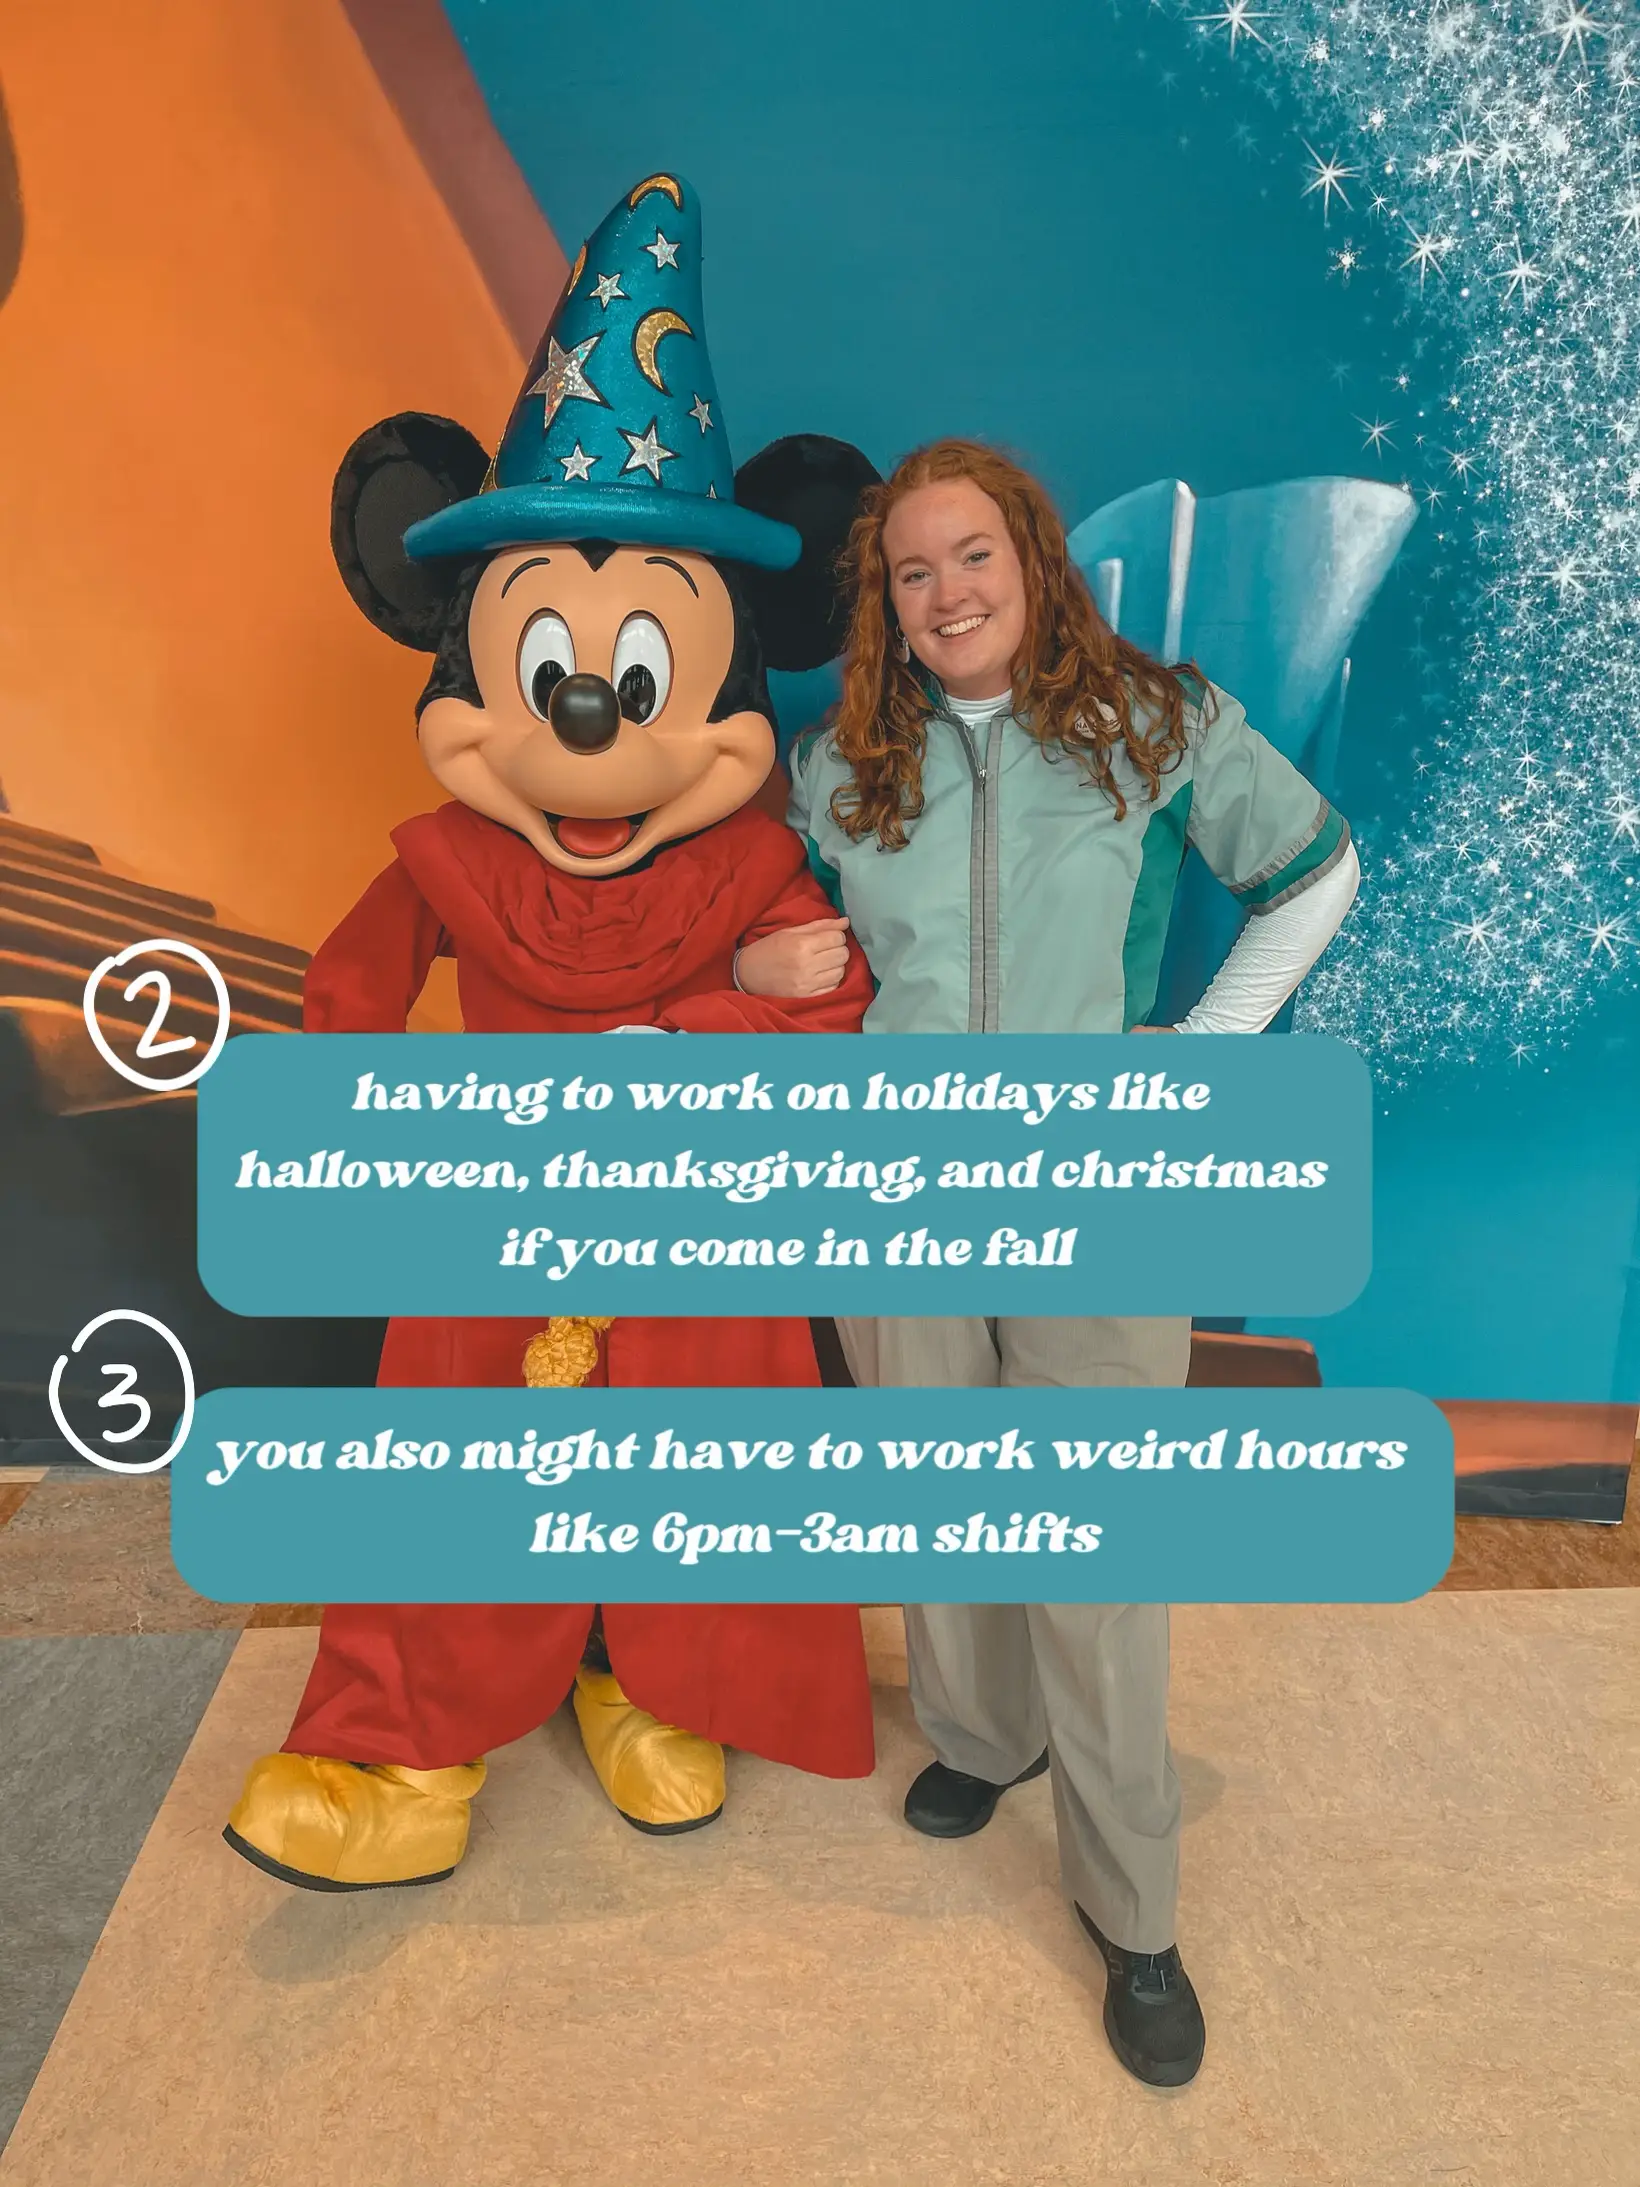  A woman is standing in front of a Mickey Mouse